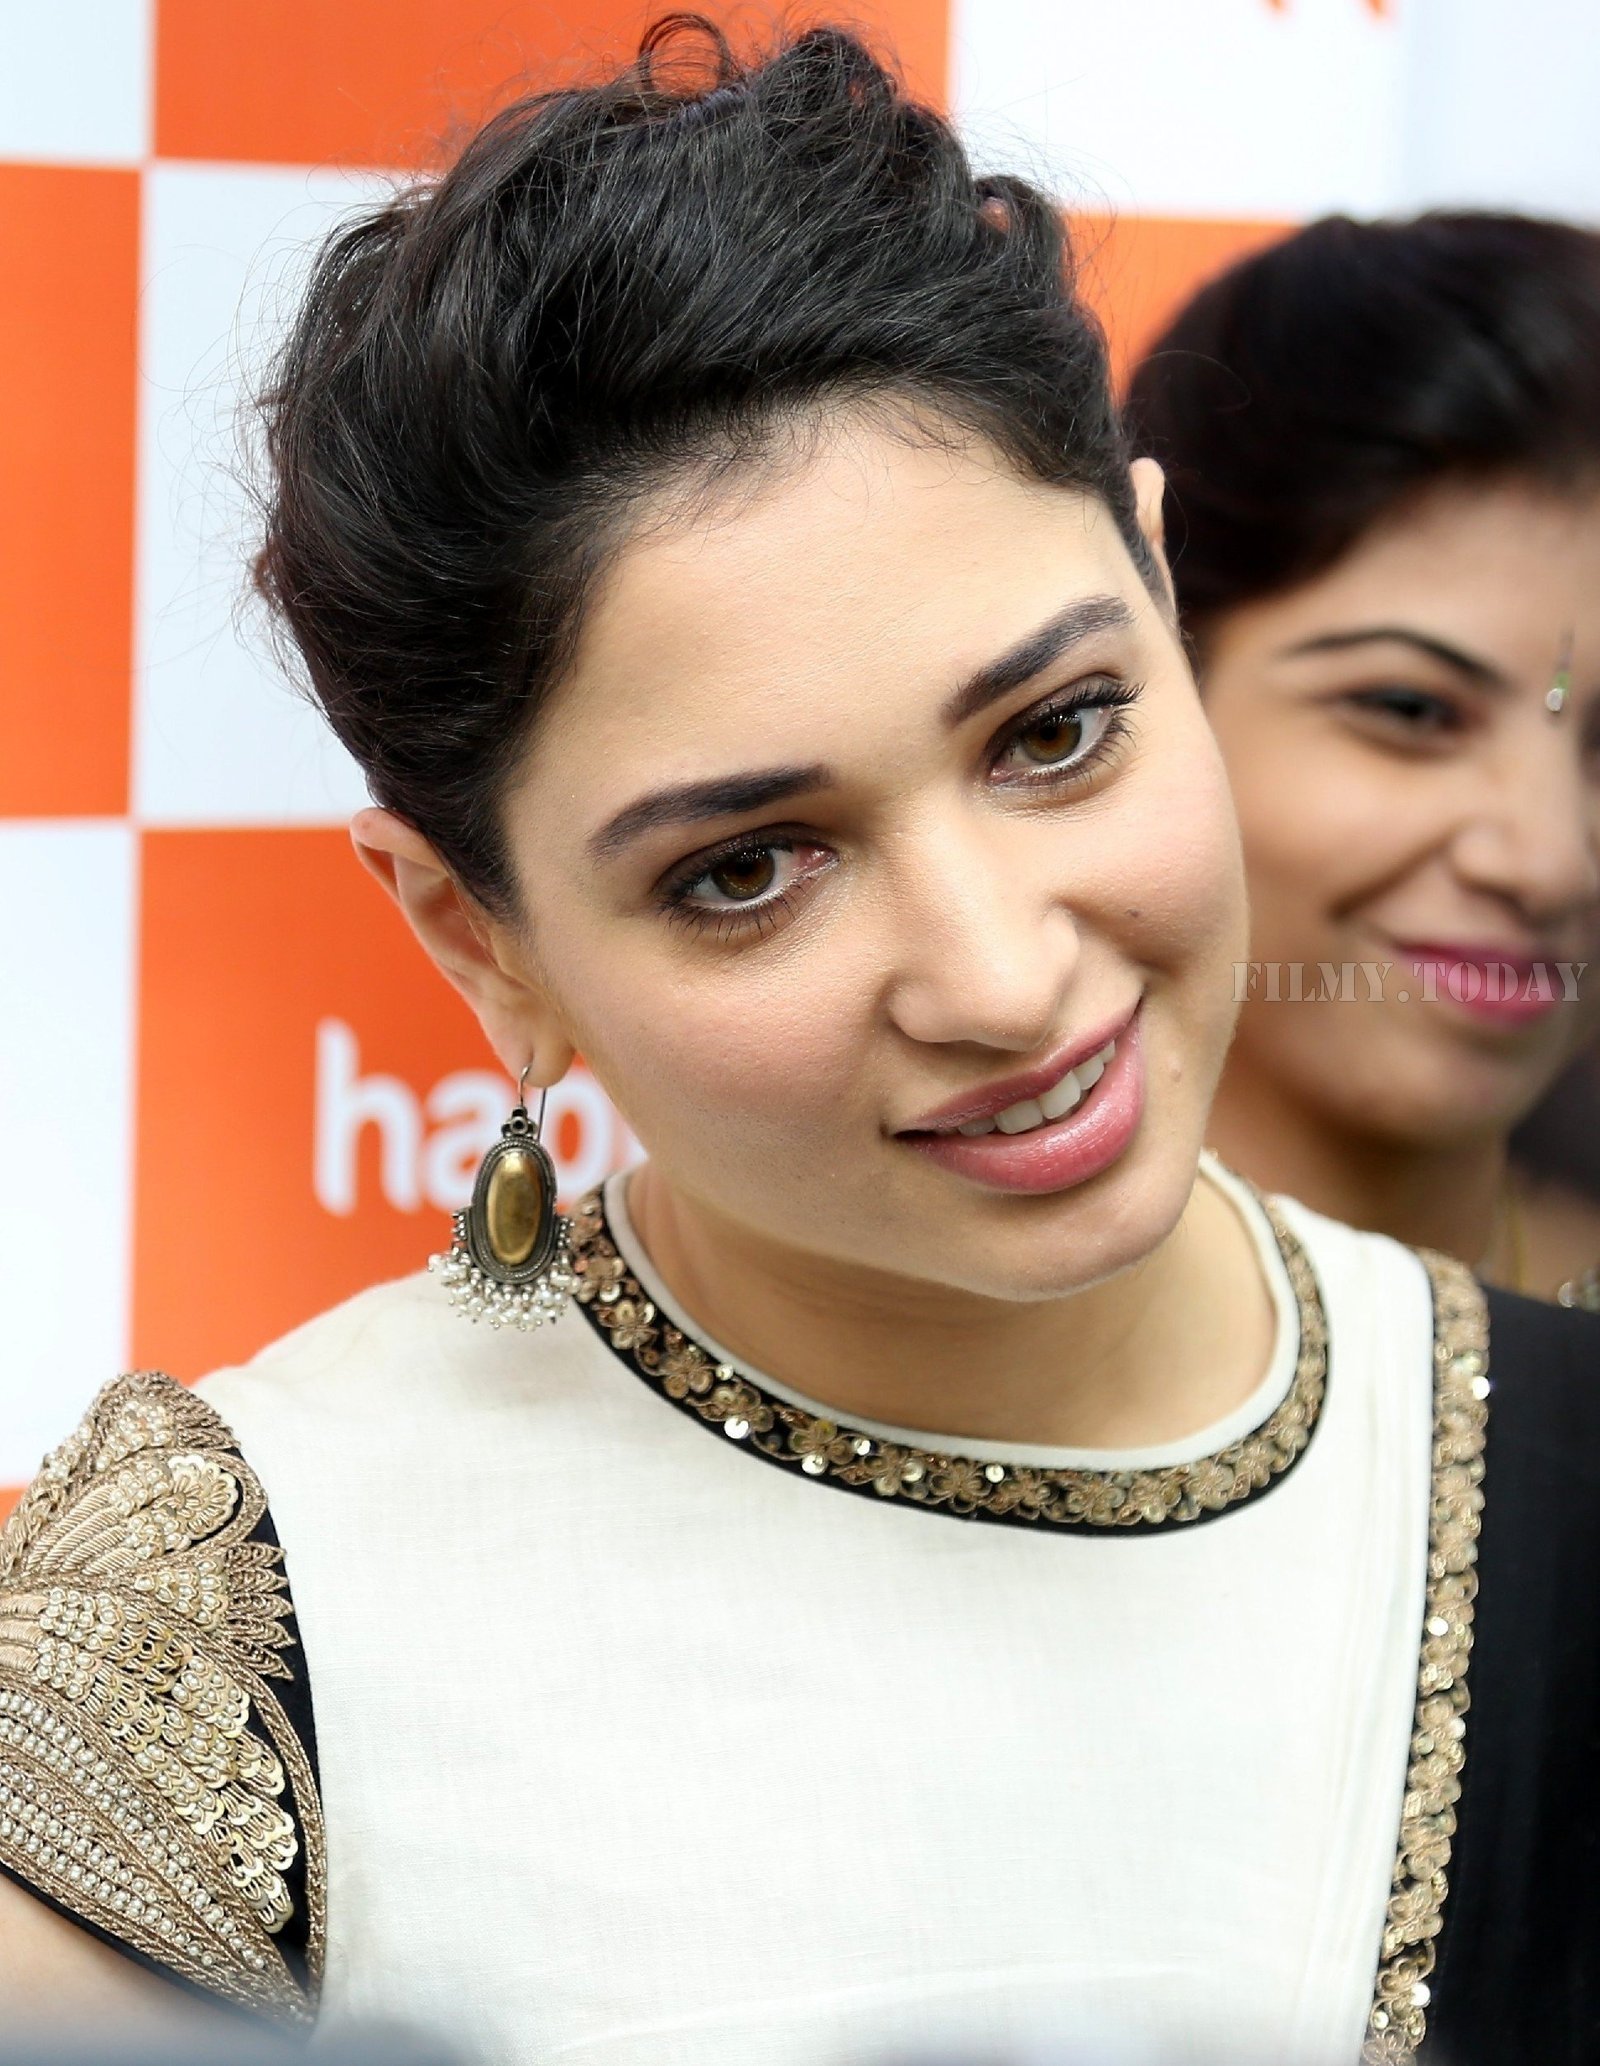 Photos: Tamanna Bhatia launches Happi Mobiles store | Picture 1577254